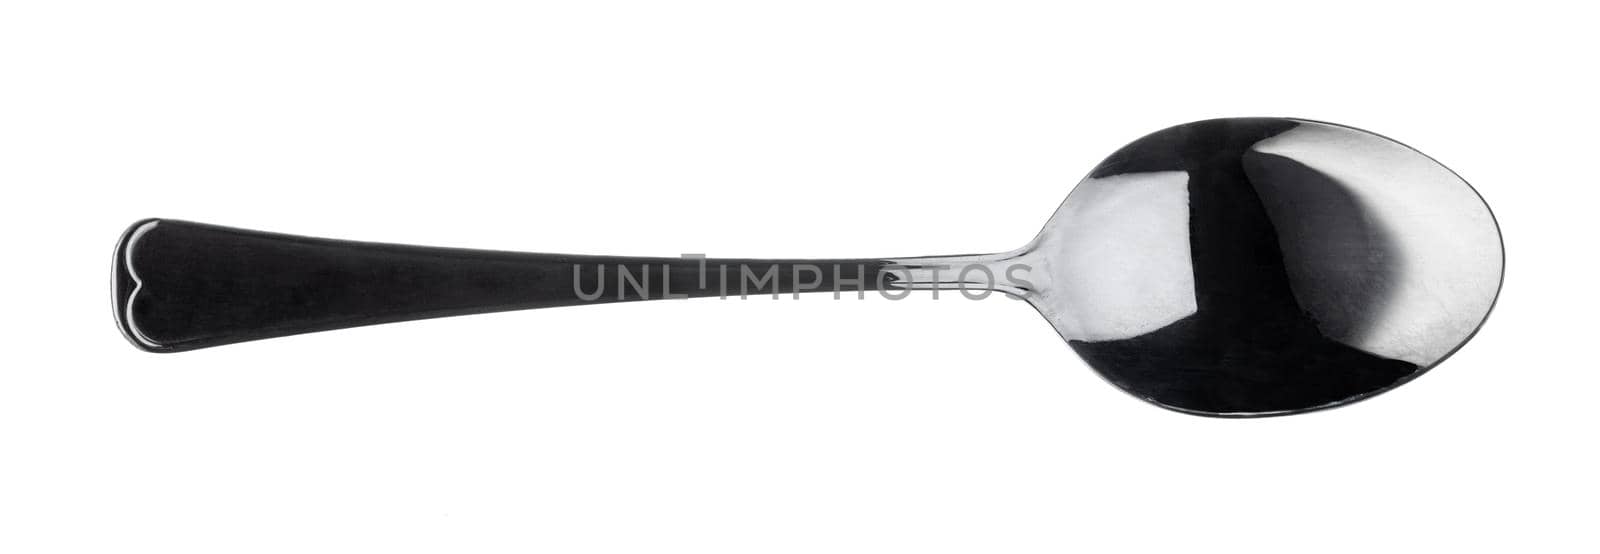 Plastic black spoon isolated on a white background close up